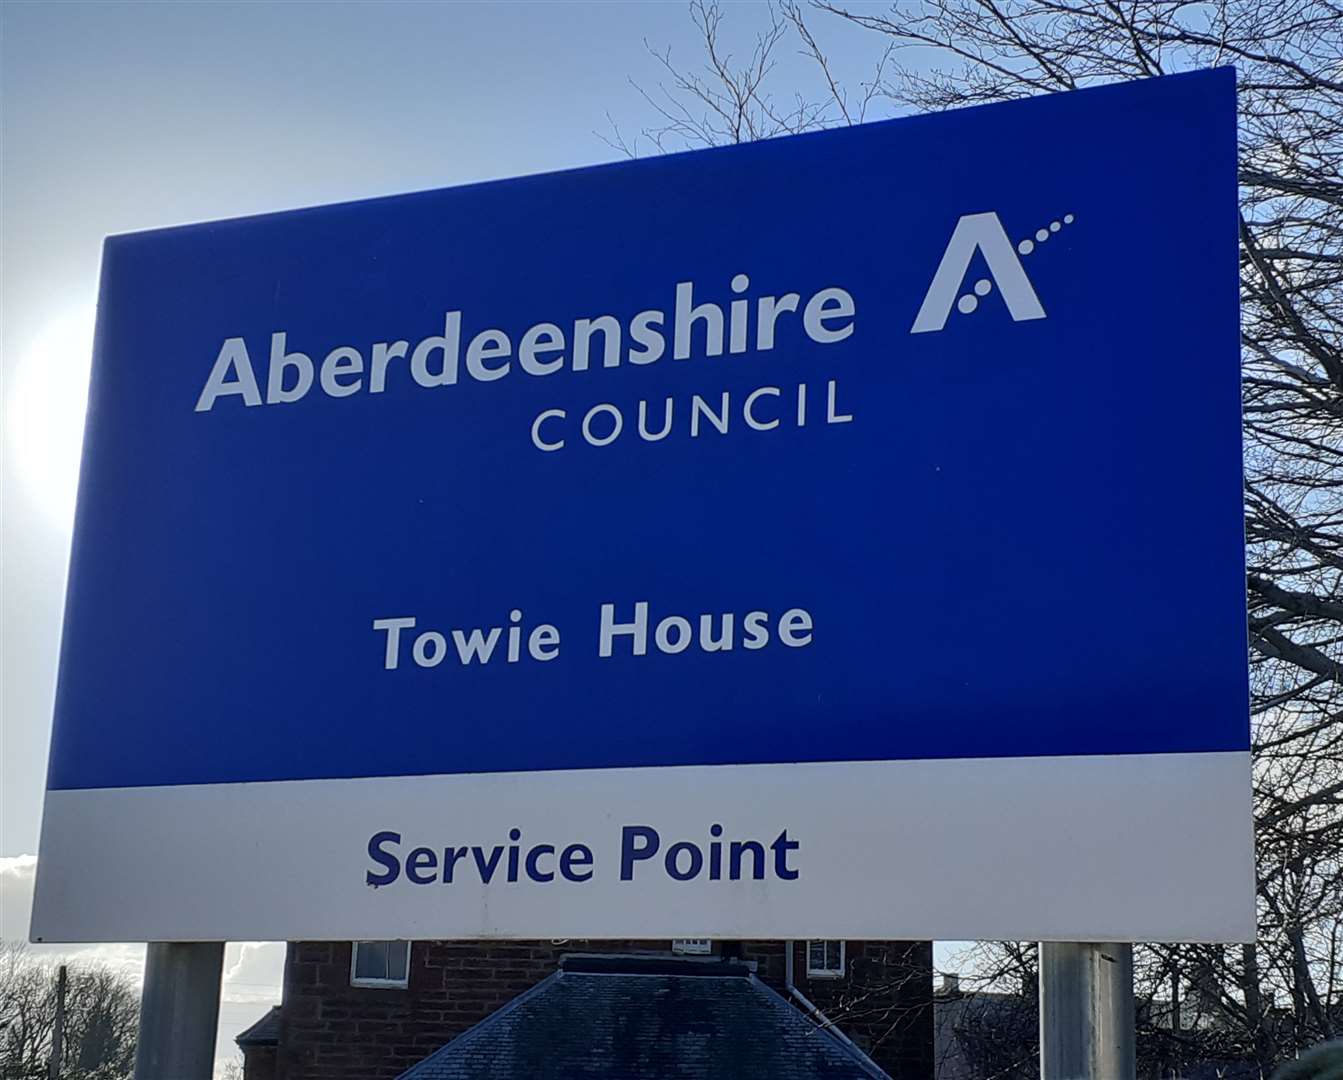 Aberdeenshire Council is set to close several north-east service points on April 26 including Towie House in Turriff